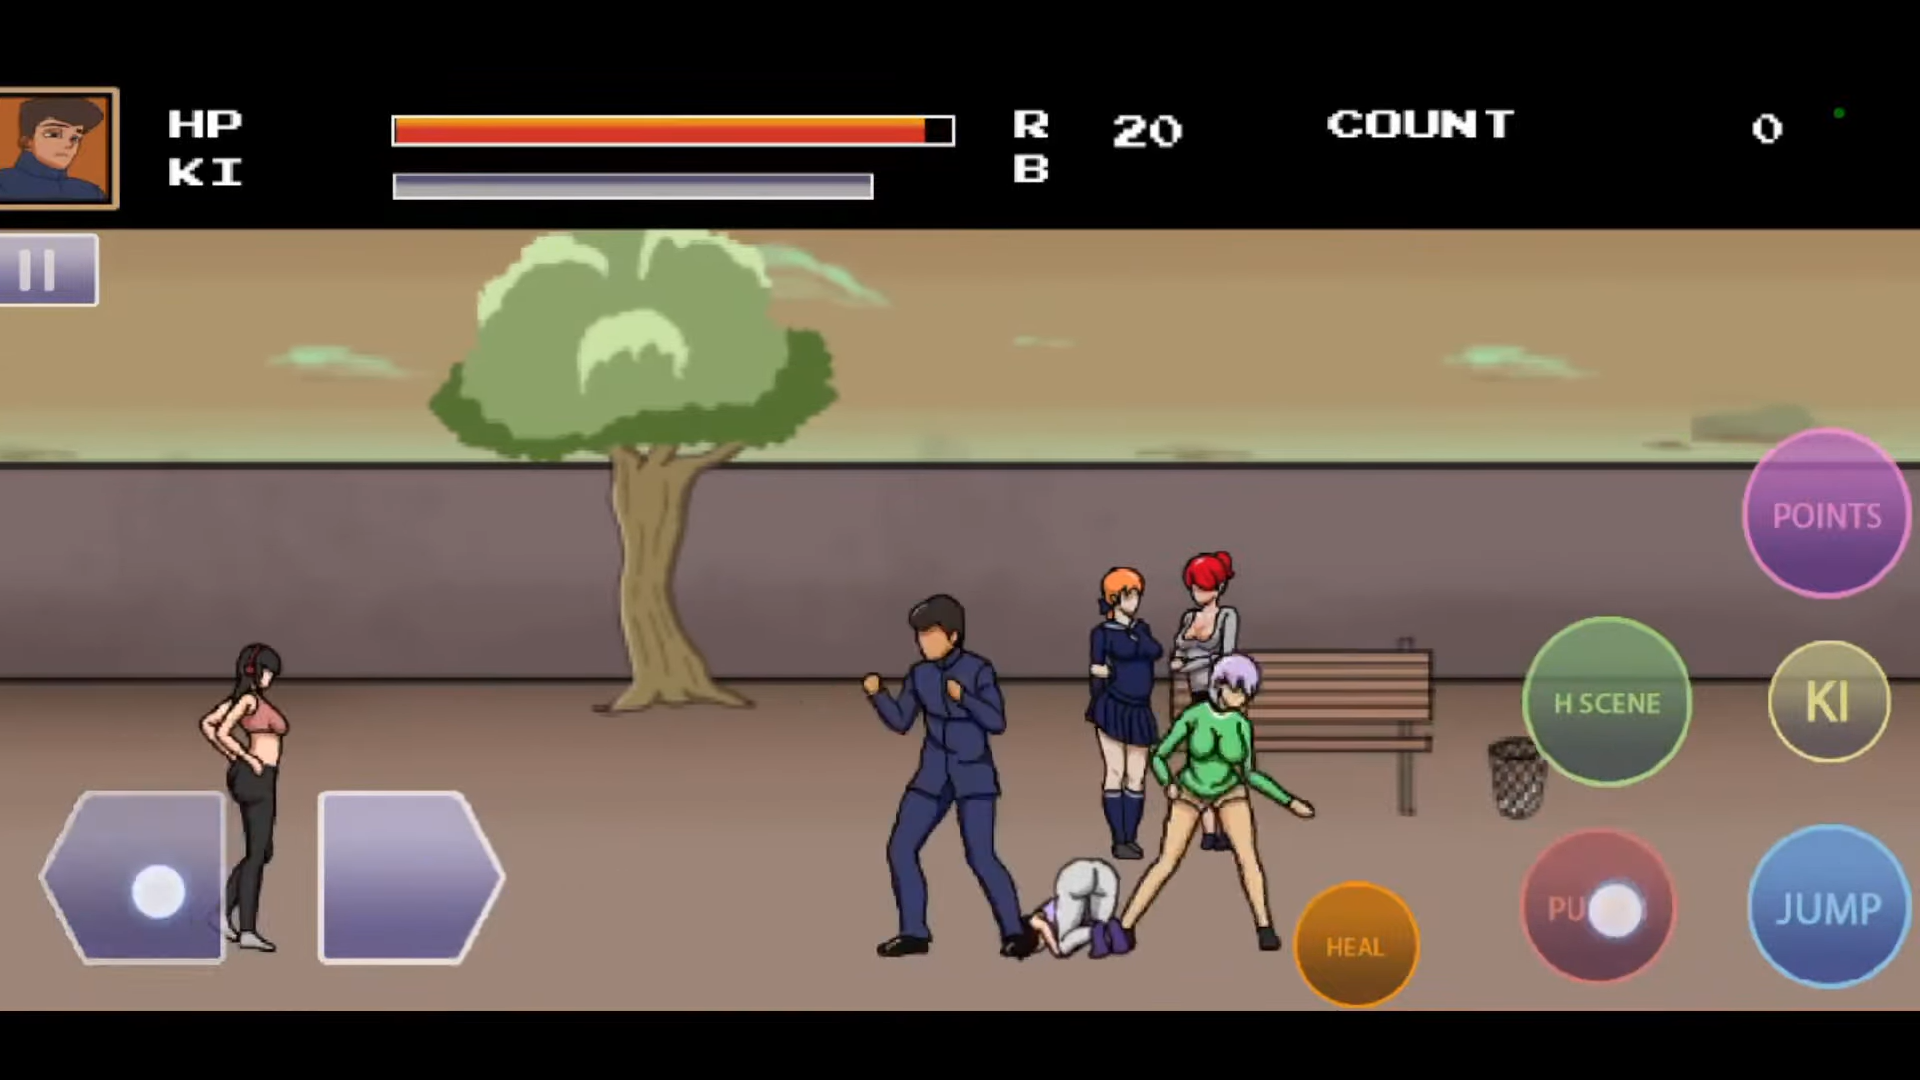 Download College Brawl : mod Mobile android on PC